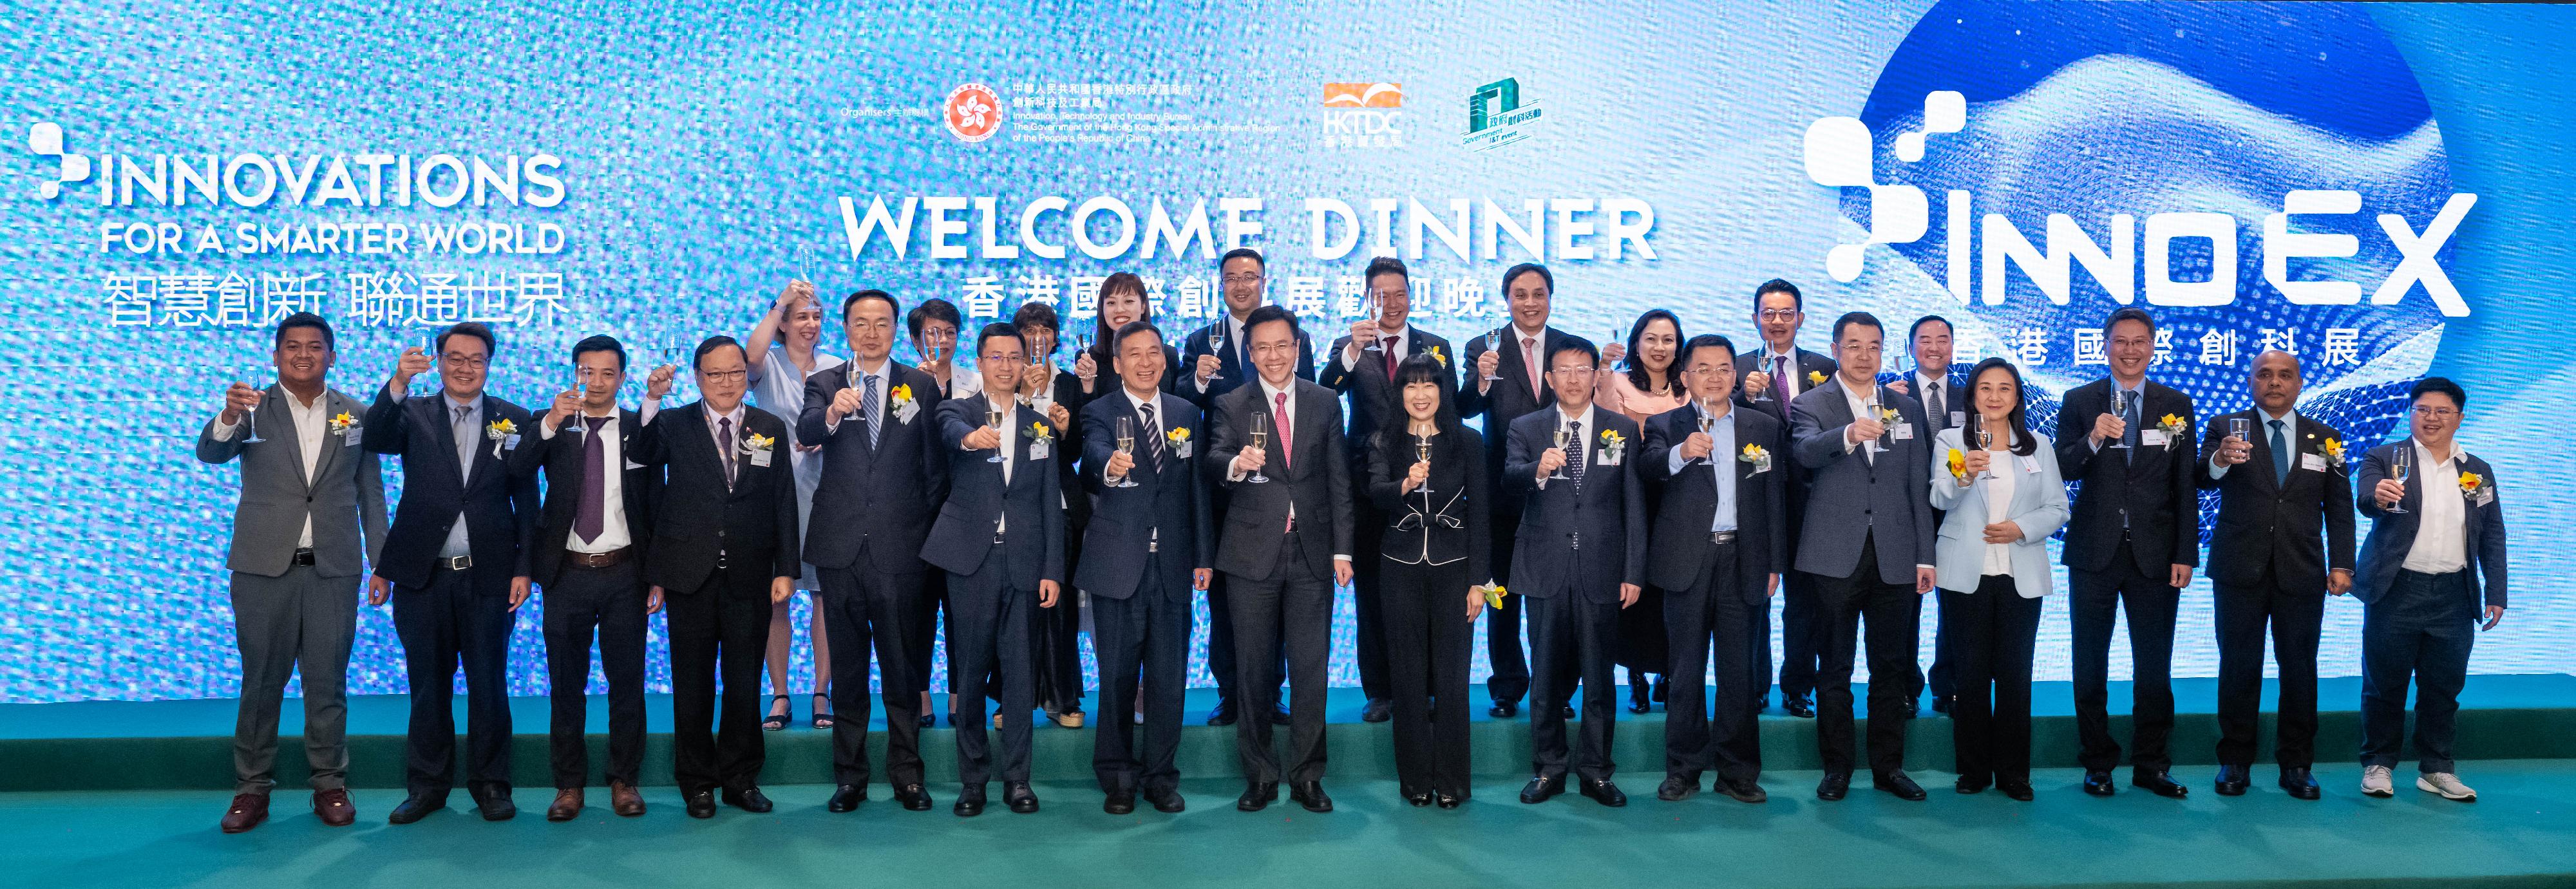 The Secretary for Innovation, Technology and Industry, Professor Sun Dong, attends the Welcome Dinner of InnoEX 2024 today (April 12). Photo shows Professor Sun (front row, eighth left); the Permanent Secretary for Innovation, Technology and Industry, Mr Eddie Mak (front row, third right); the Under Secretary for Innovation, Technology and Industry, Ms Lillian Cheong (back row, fourth left); the Government Chief Information Officer, Mr Tony Wong (back row, first right); the Executive Director of the Hong Kong Trade Development Council, Ms Margaret Fong (front row, eighth right); the Chairman of the Board of Directors of the Hong Kong Cyberport Management Company Limited, Mr Simon Chan (back row, fourth right); and other guests, toasting at the welcome dinner.